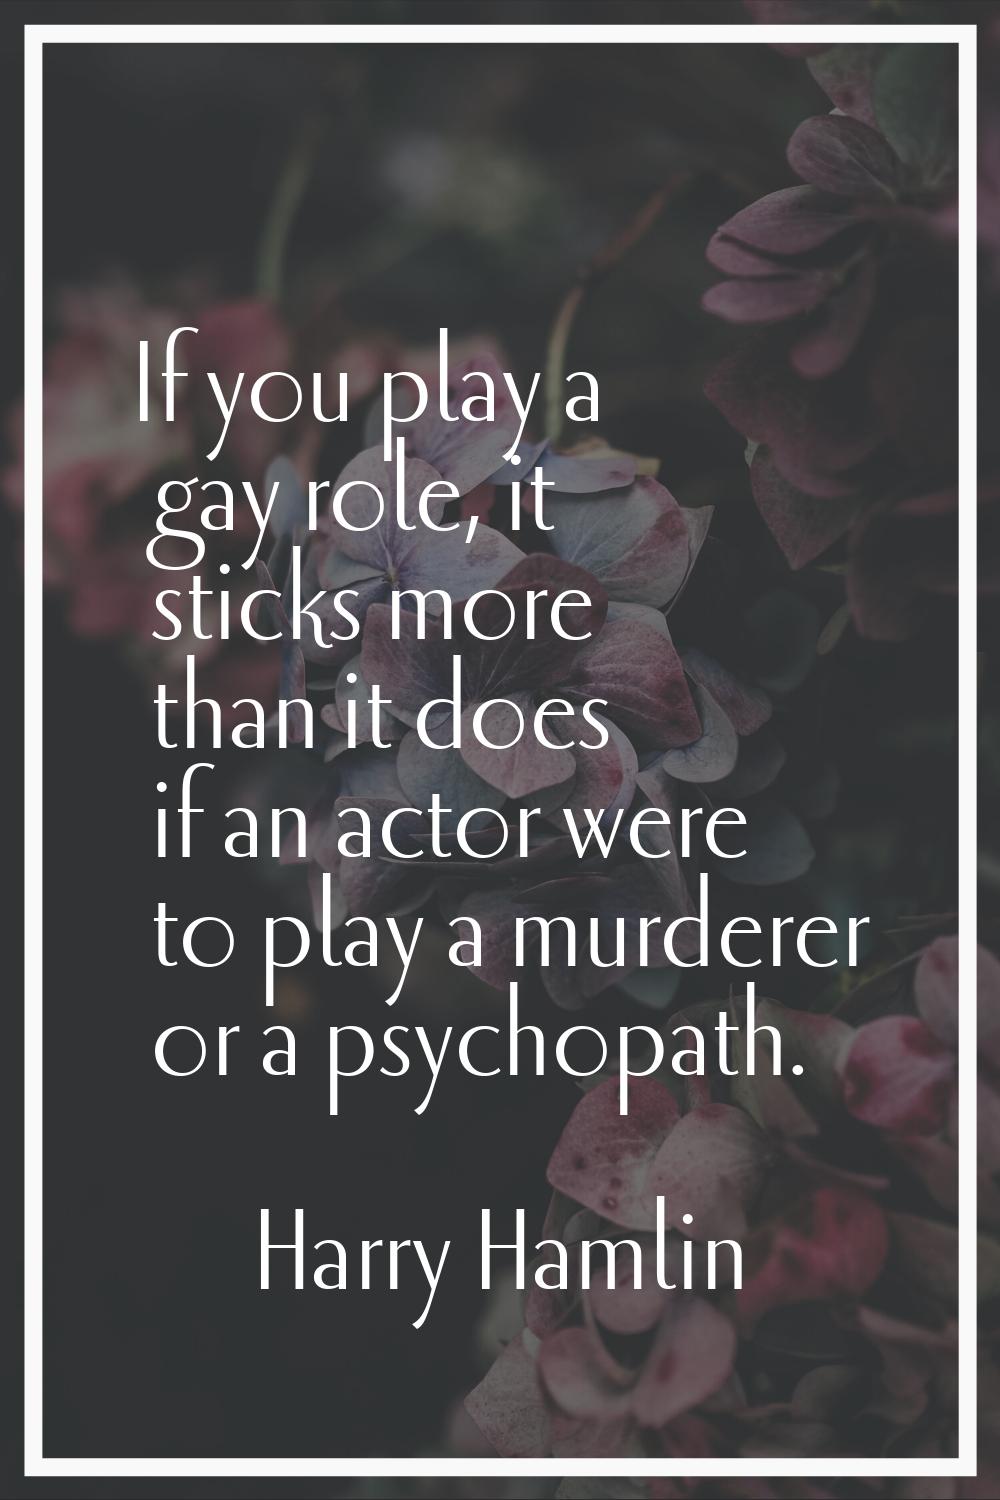 If you play a gay role, it sticks more than it does if an actor were to play a murderer or a psycho